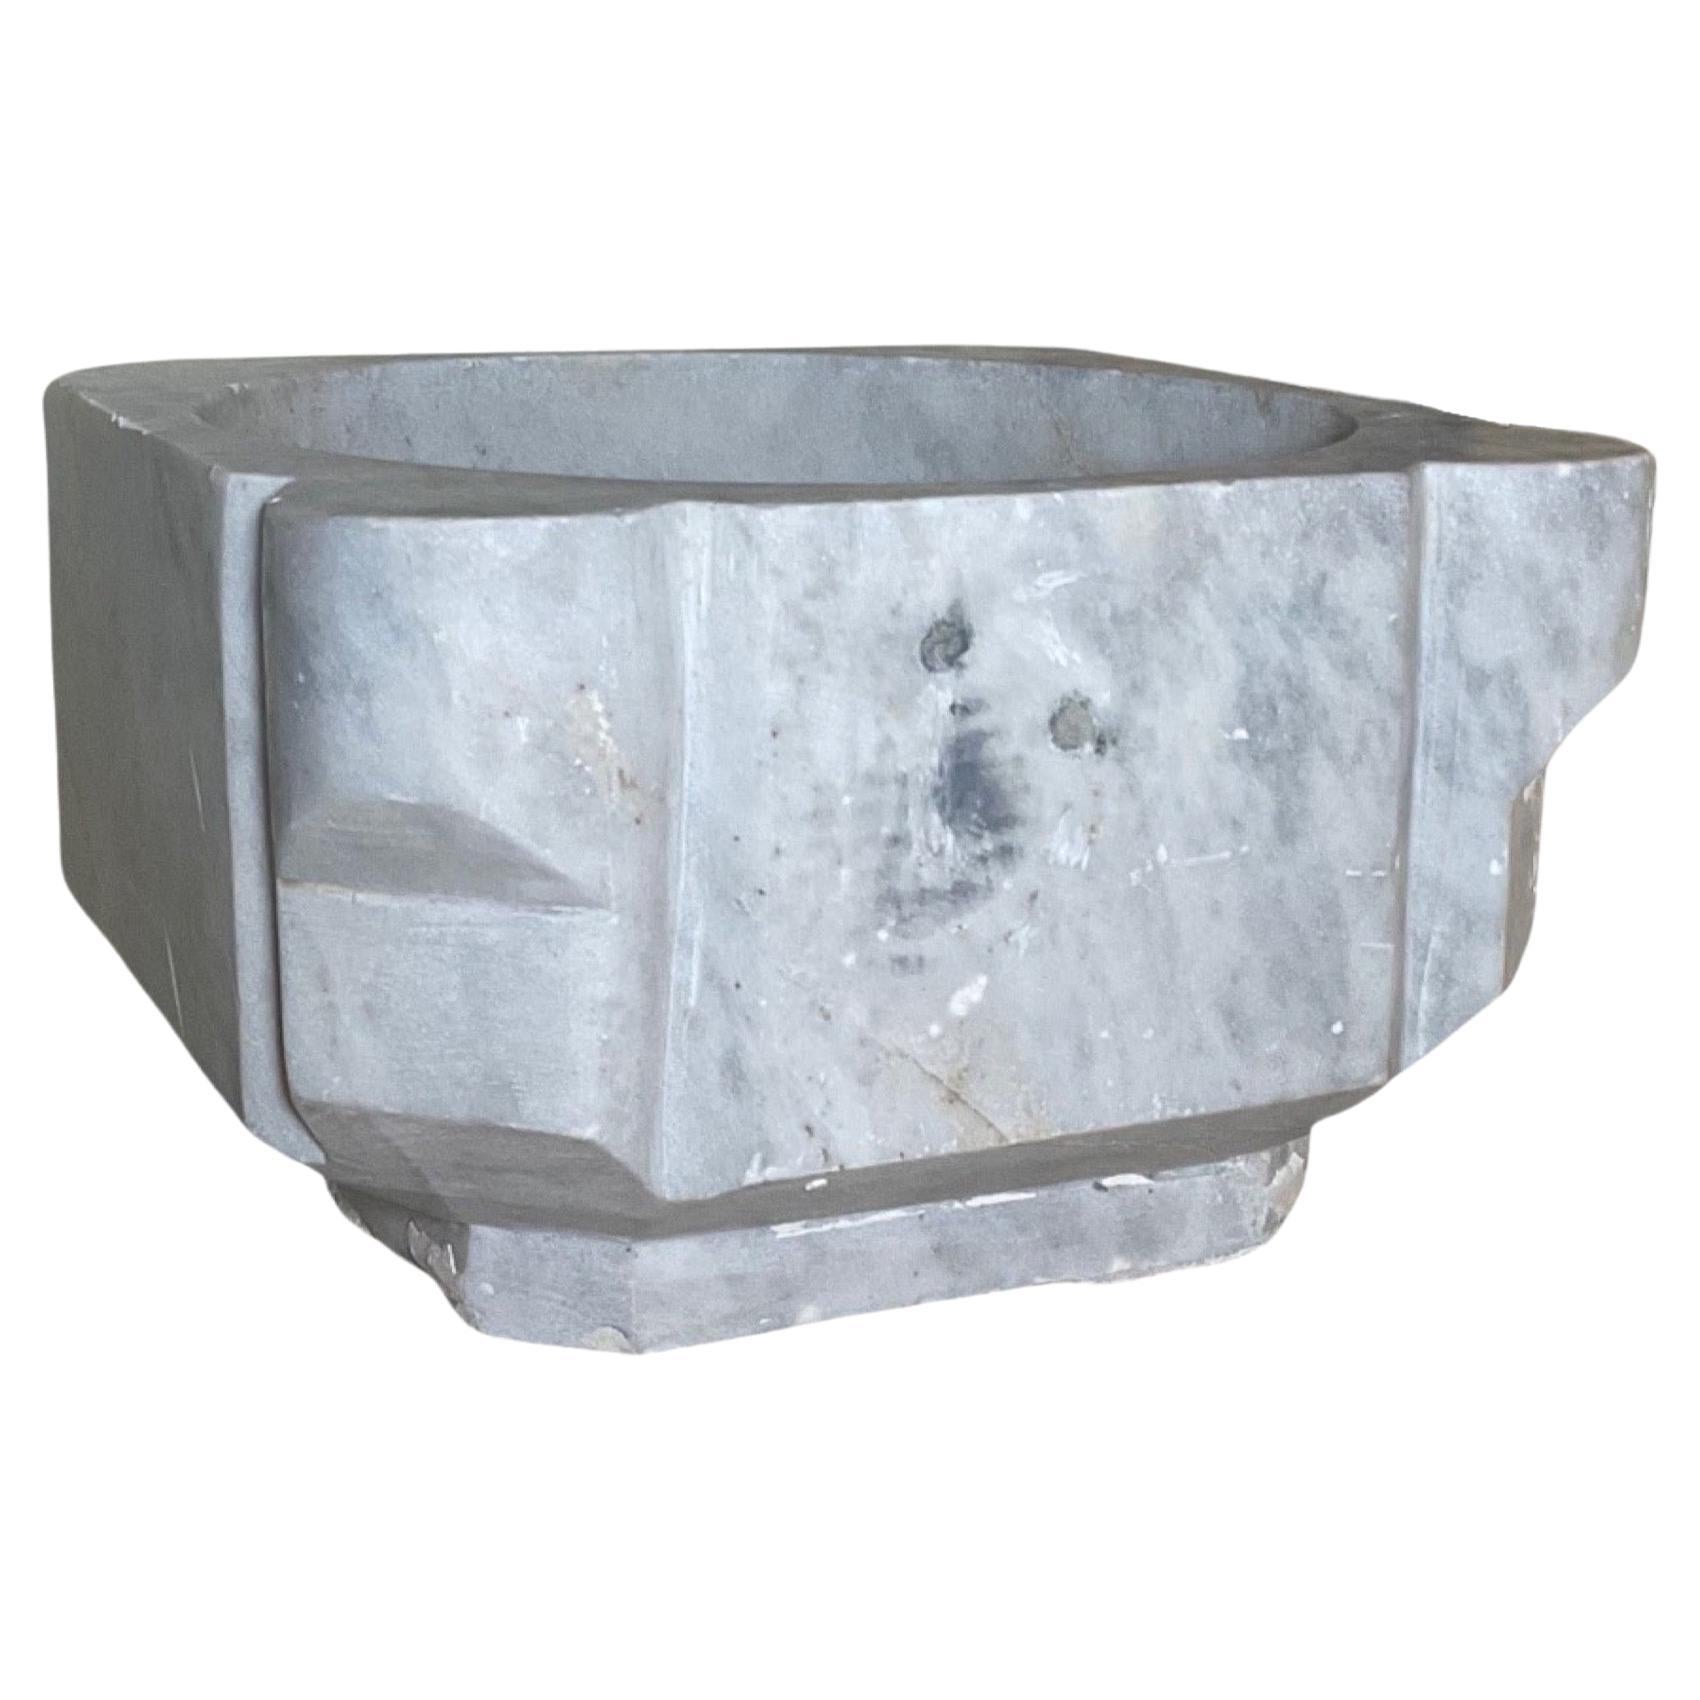 This 18th-century French white marble sink is a timeless, elegant addition to any bathroom. Its all-natural marble material is exquisitely crafted and durable enough to endure the daily wear and tear of bathroom use. The opulent marble texture